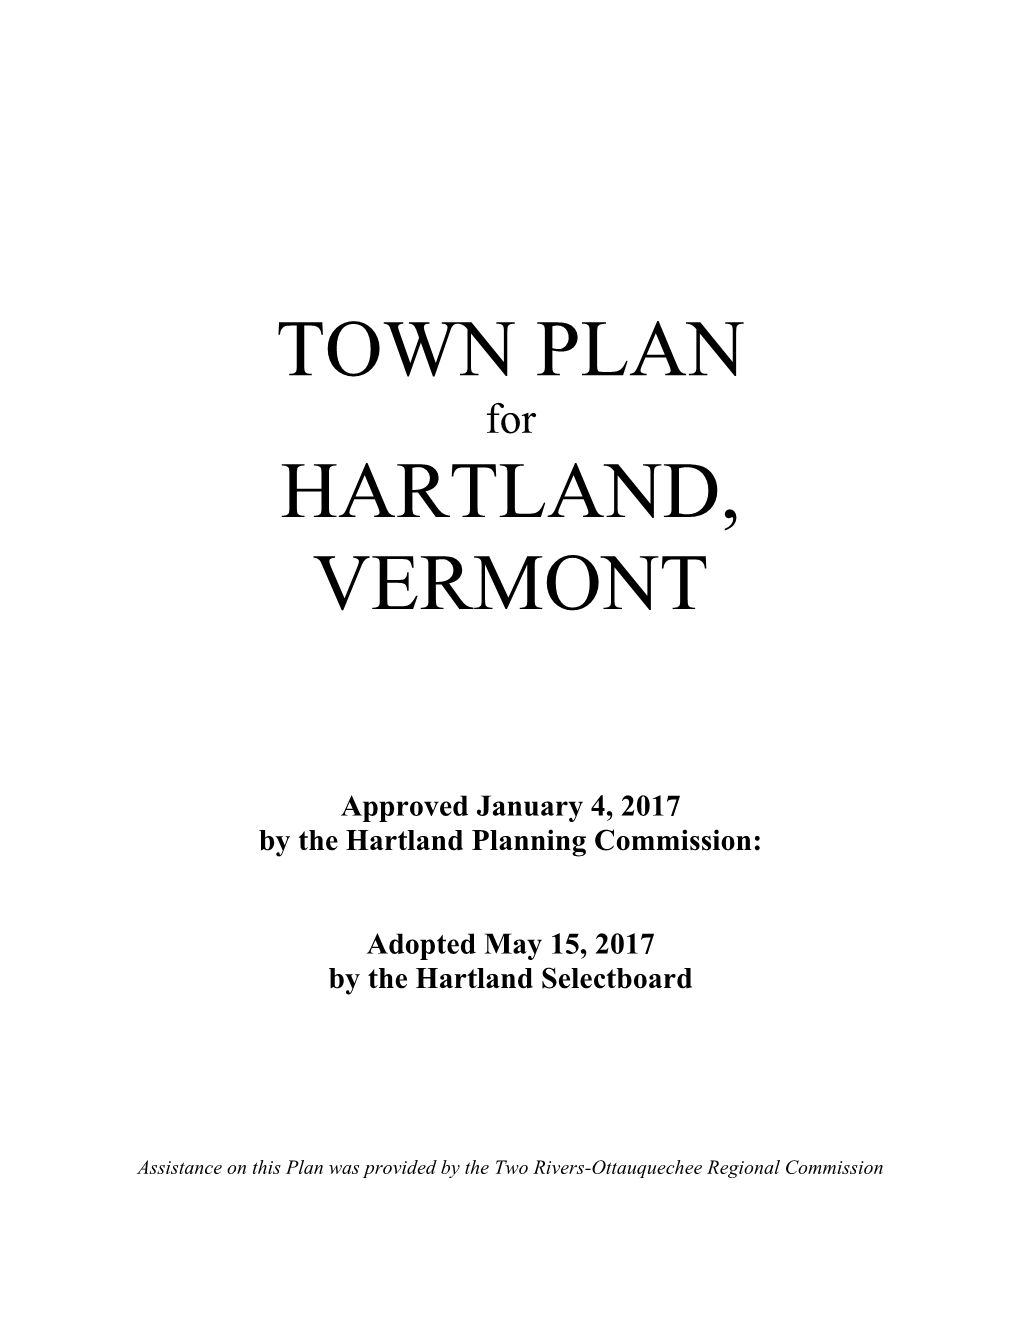 TOWN PLAN for HARTLAND, VERMONT